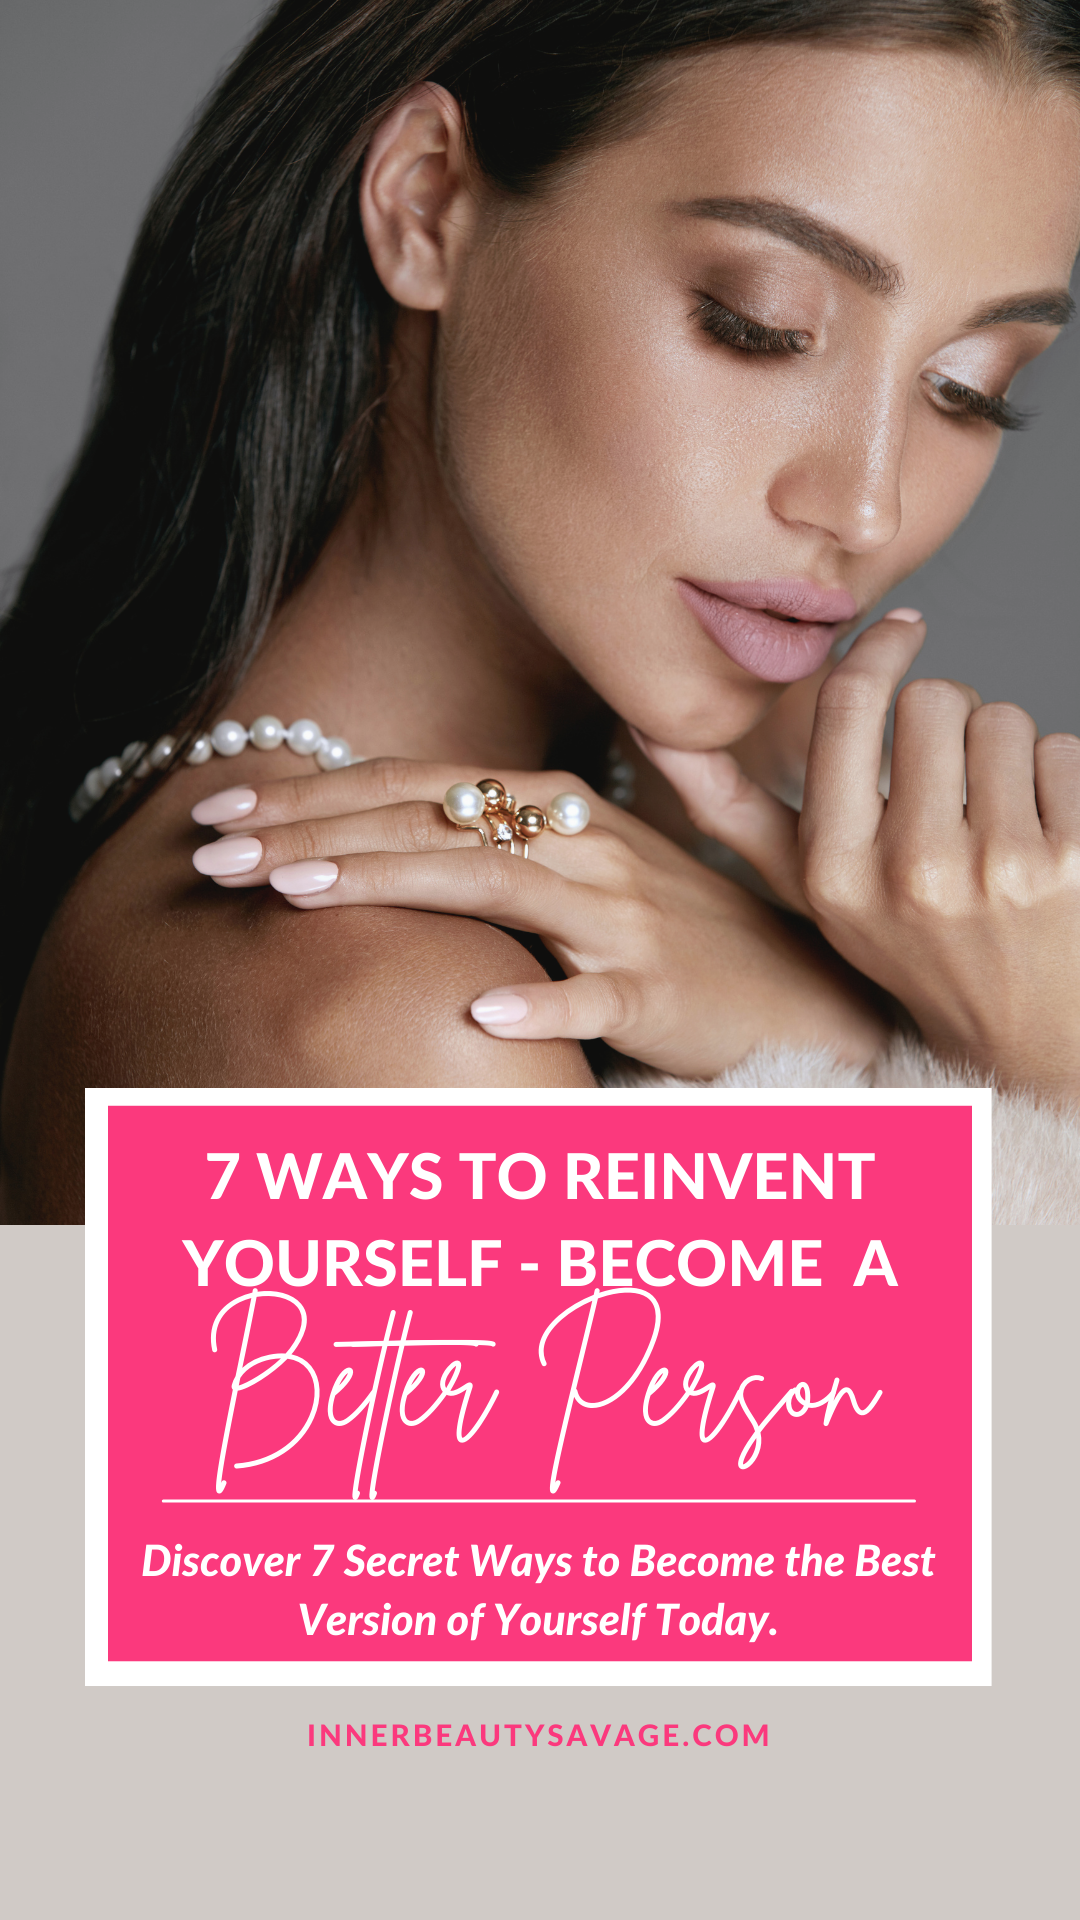 Pinterest Pin on how to reinvent yourself-becoming 'her'